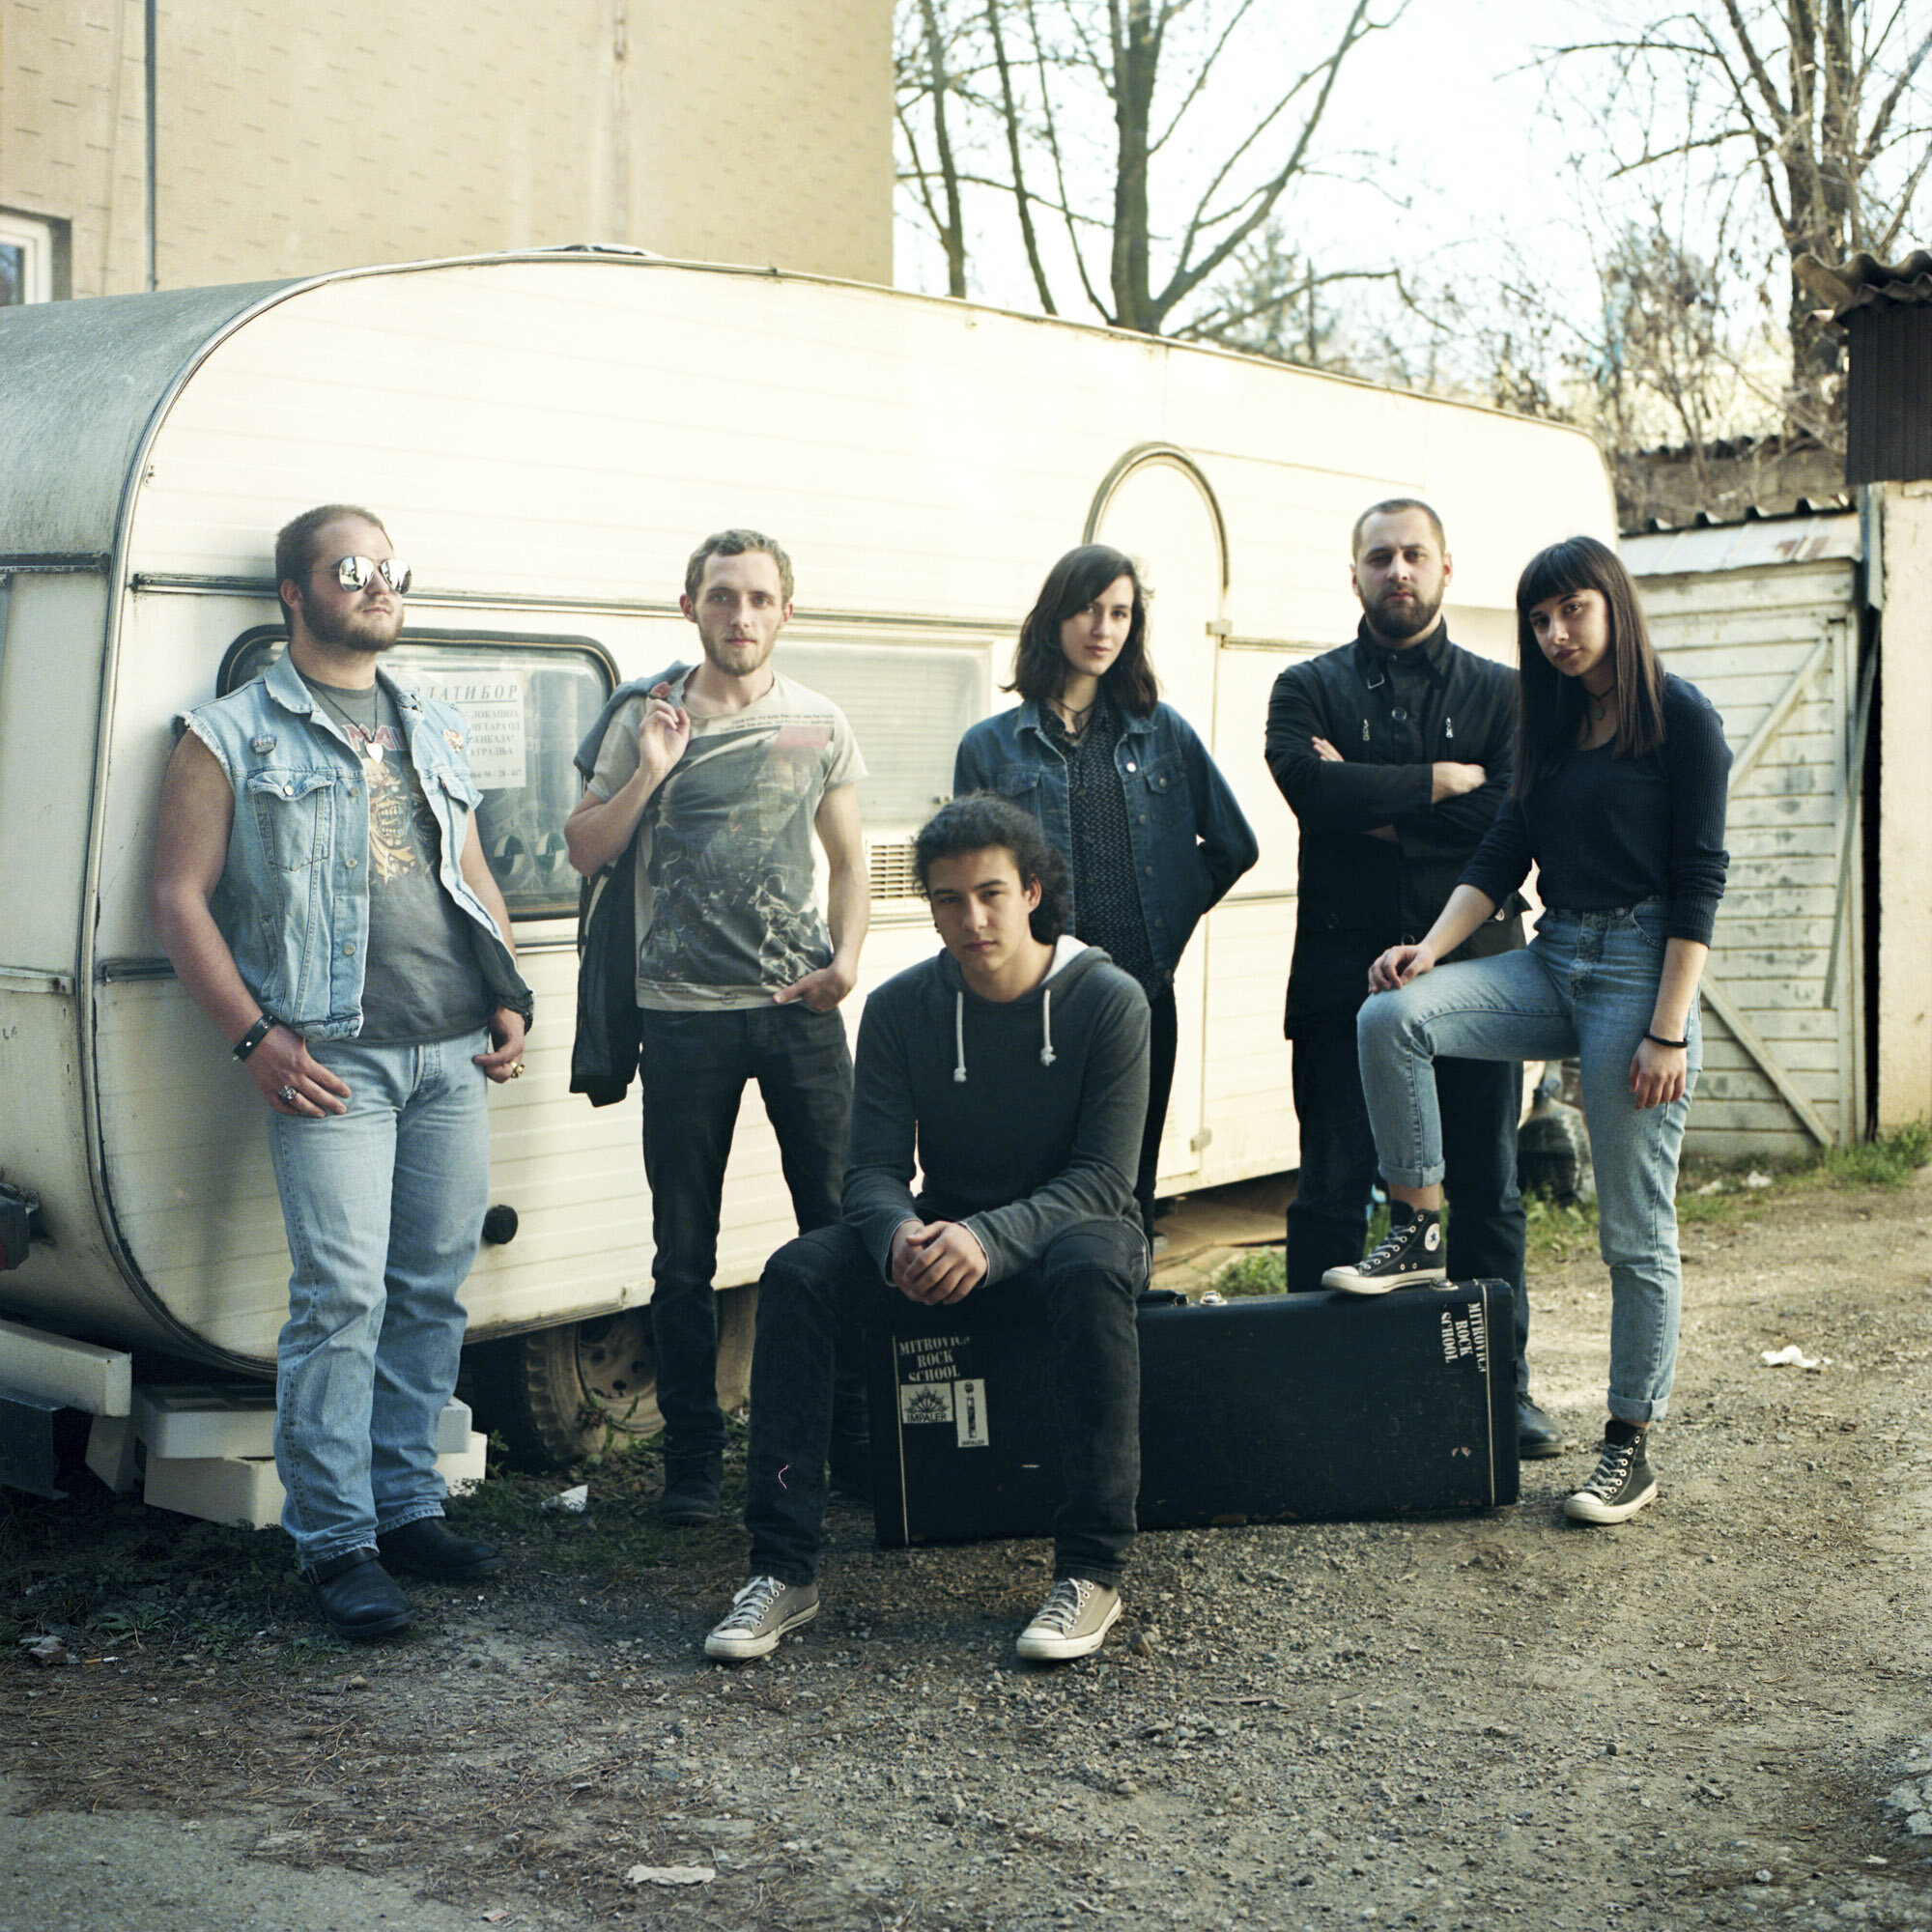  The multi-ethnic rock band Proximity Mine in front of a caravan in the Serbian side of Mitrovica, Kosovo, on March 29, 2017. All of them are students at Mitrovica Rock School. 